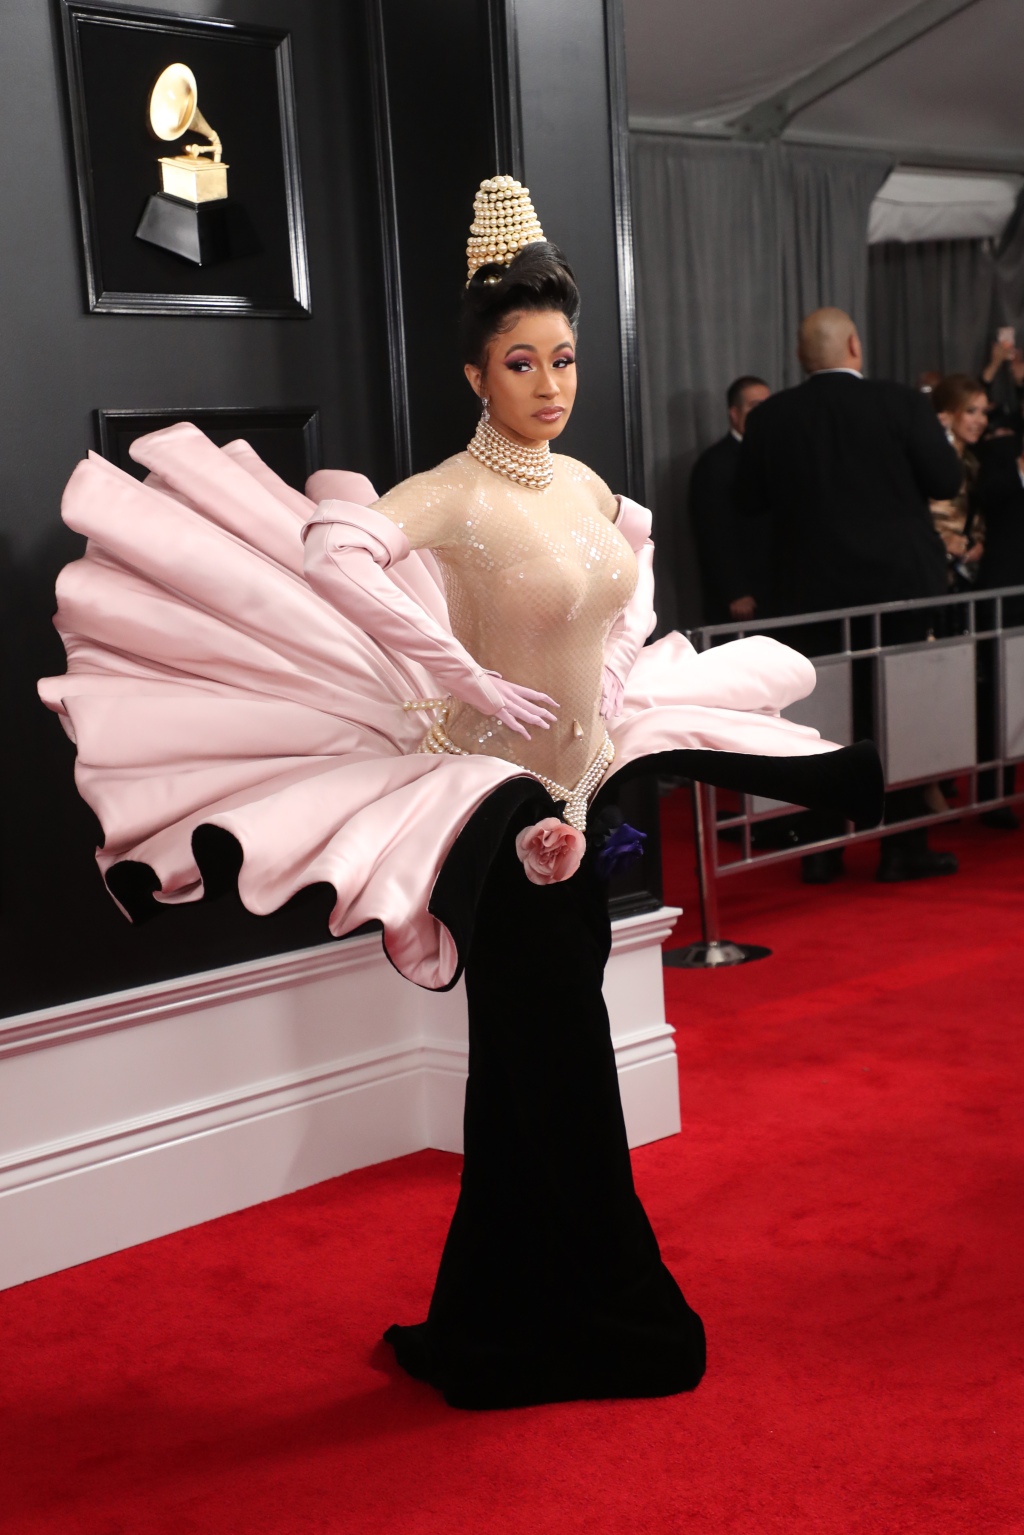 No, that’s not a typo. Mugler’s gown was inspired by the painting “Birth of Venus.” It was made to commemorate his 20th anniversary. Cardi B later reprised the look in 2019 for the Grammys.